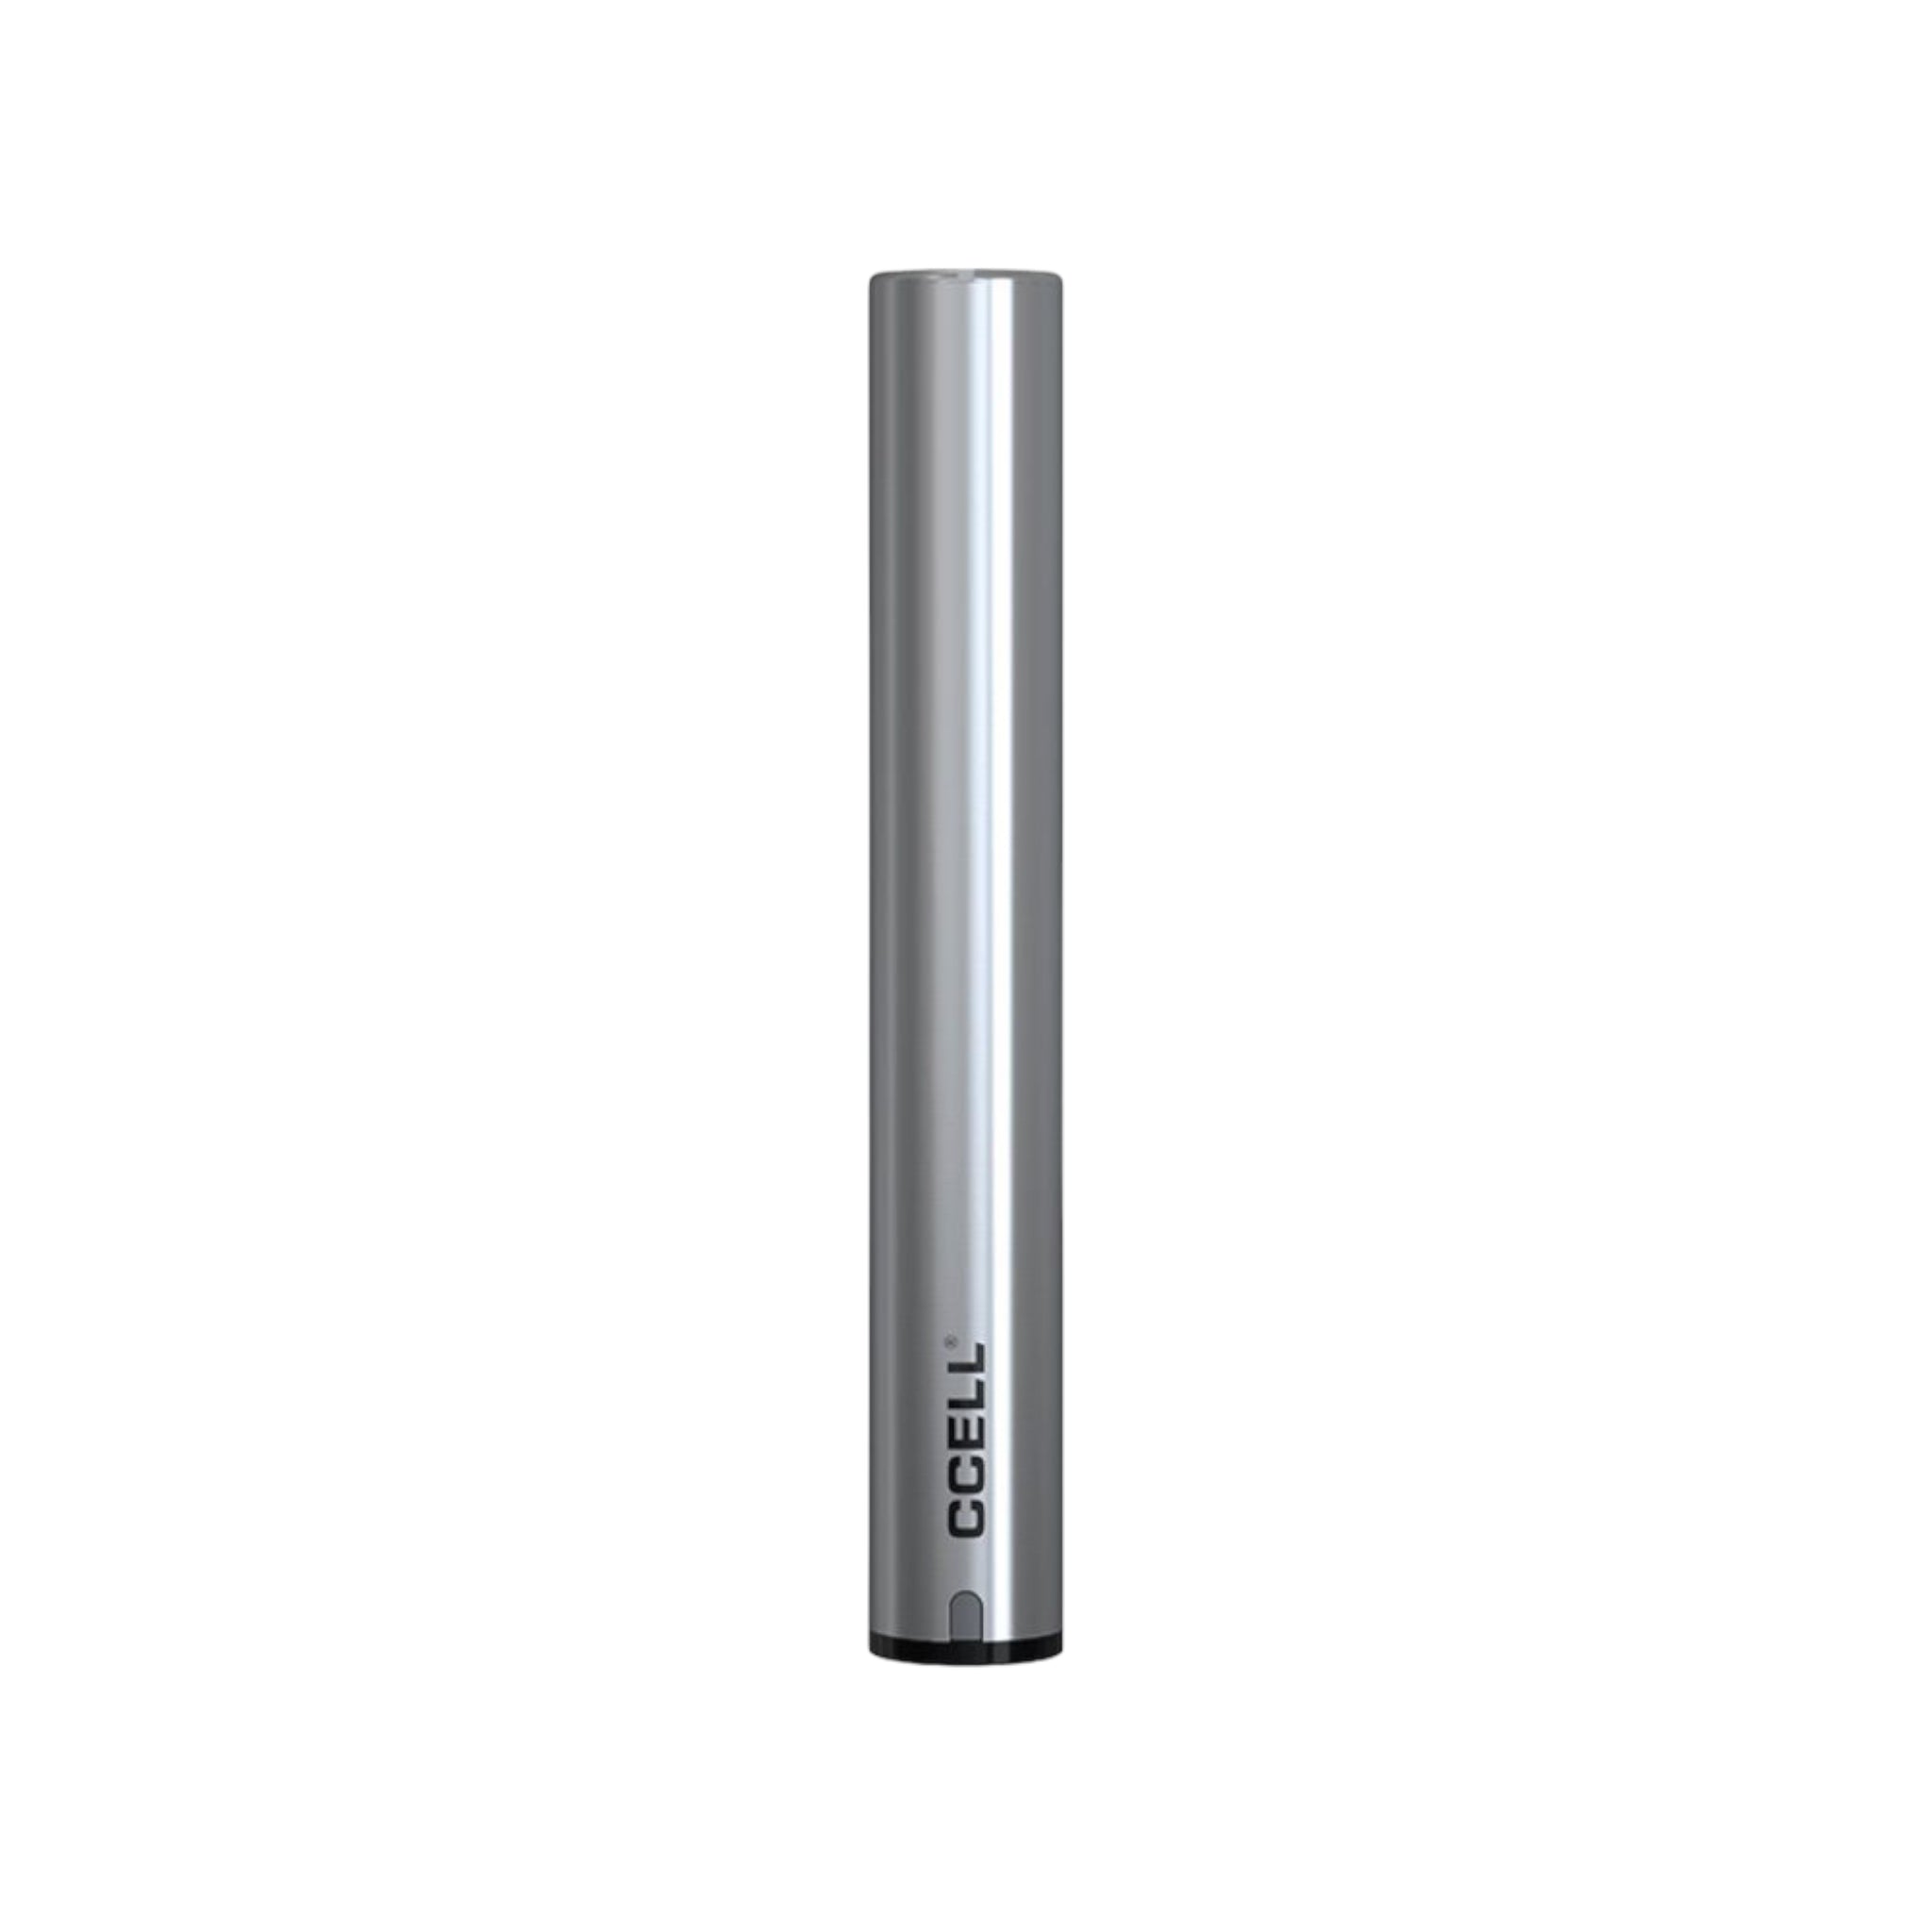 CCELL M3 Plus 510 Thread Battery - Silver